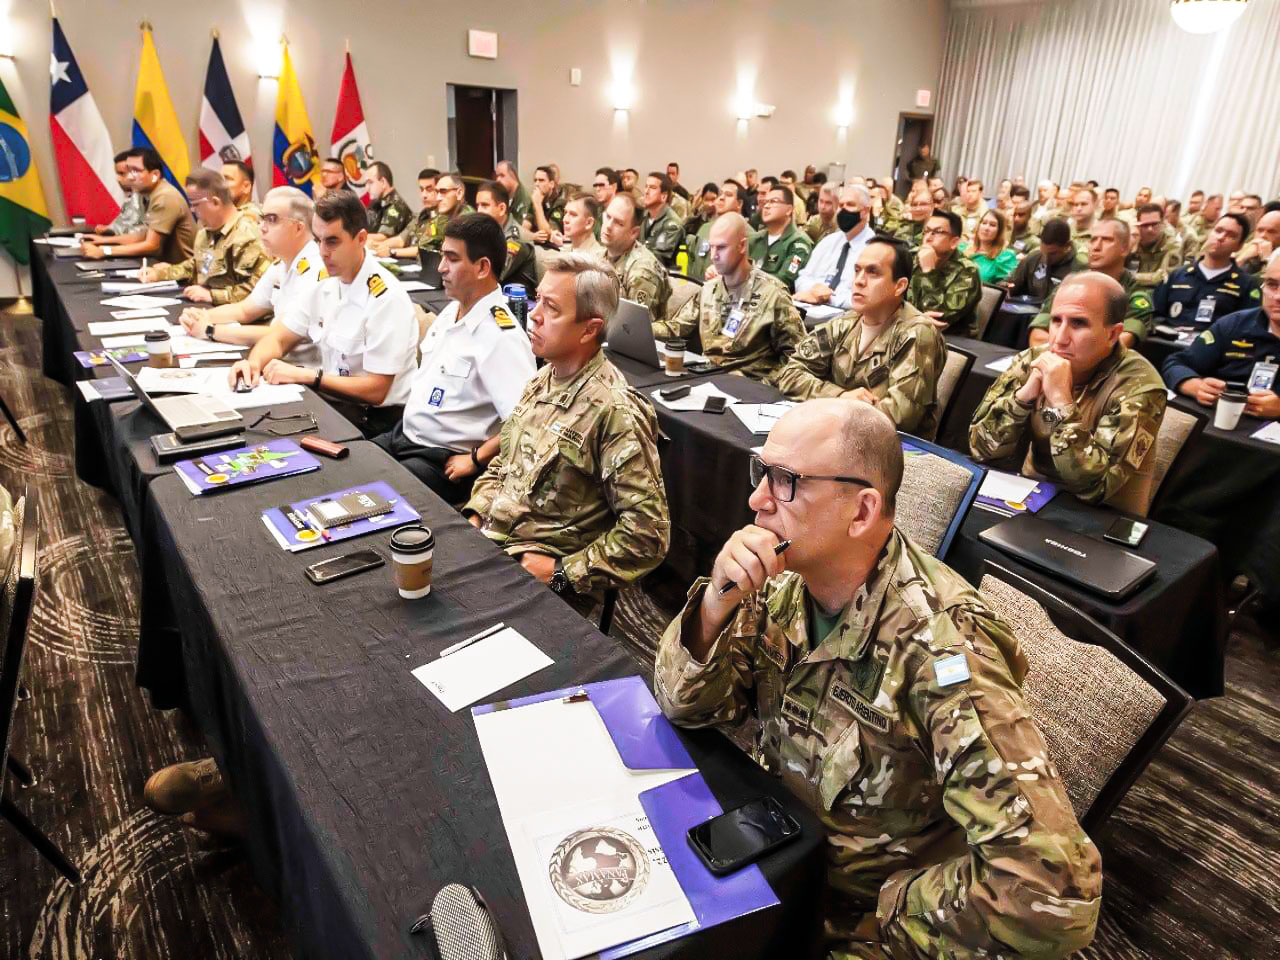 Logistics Command takes part in planning the Panamax international exercise